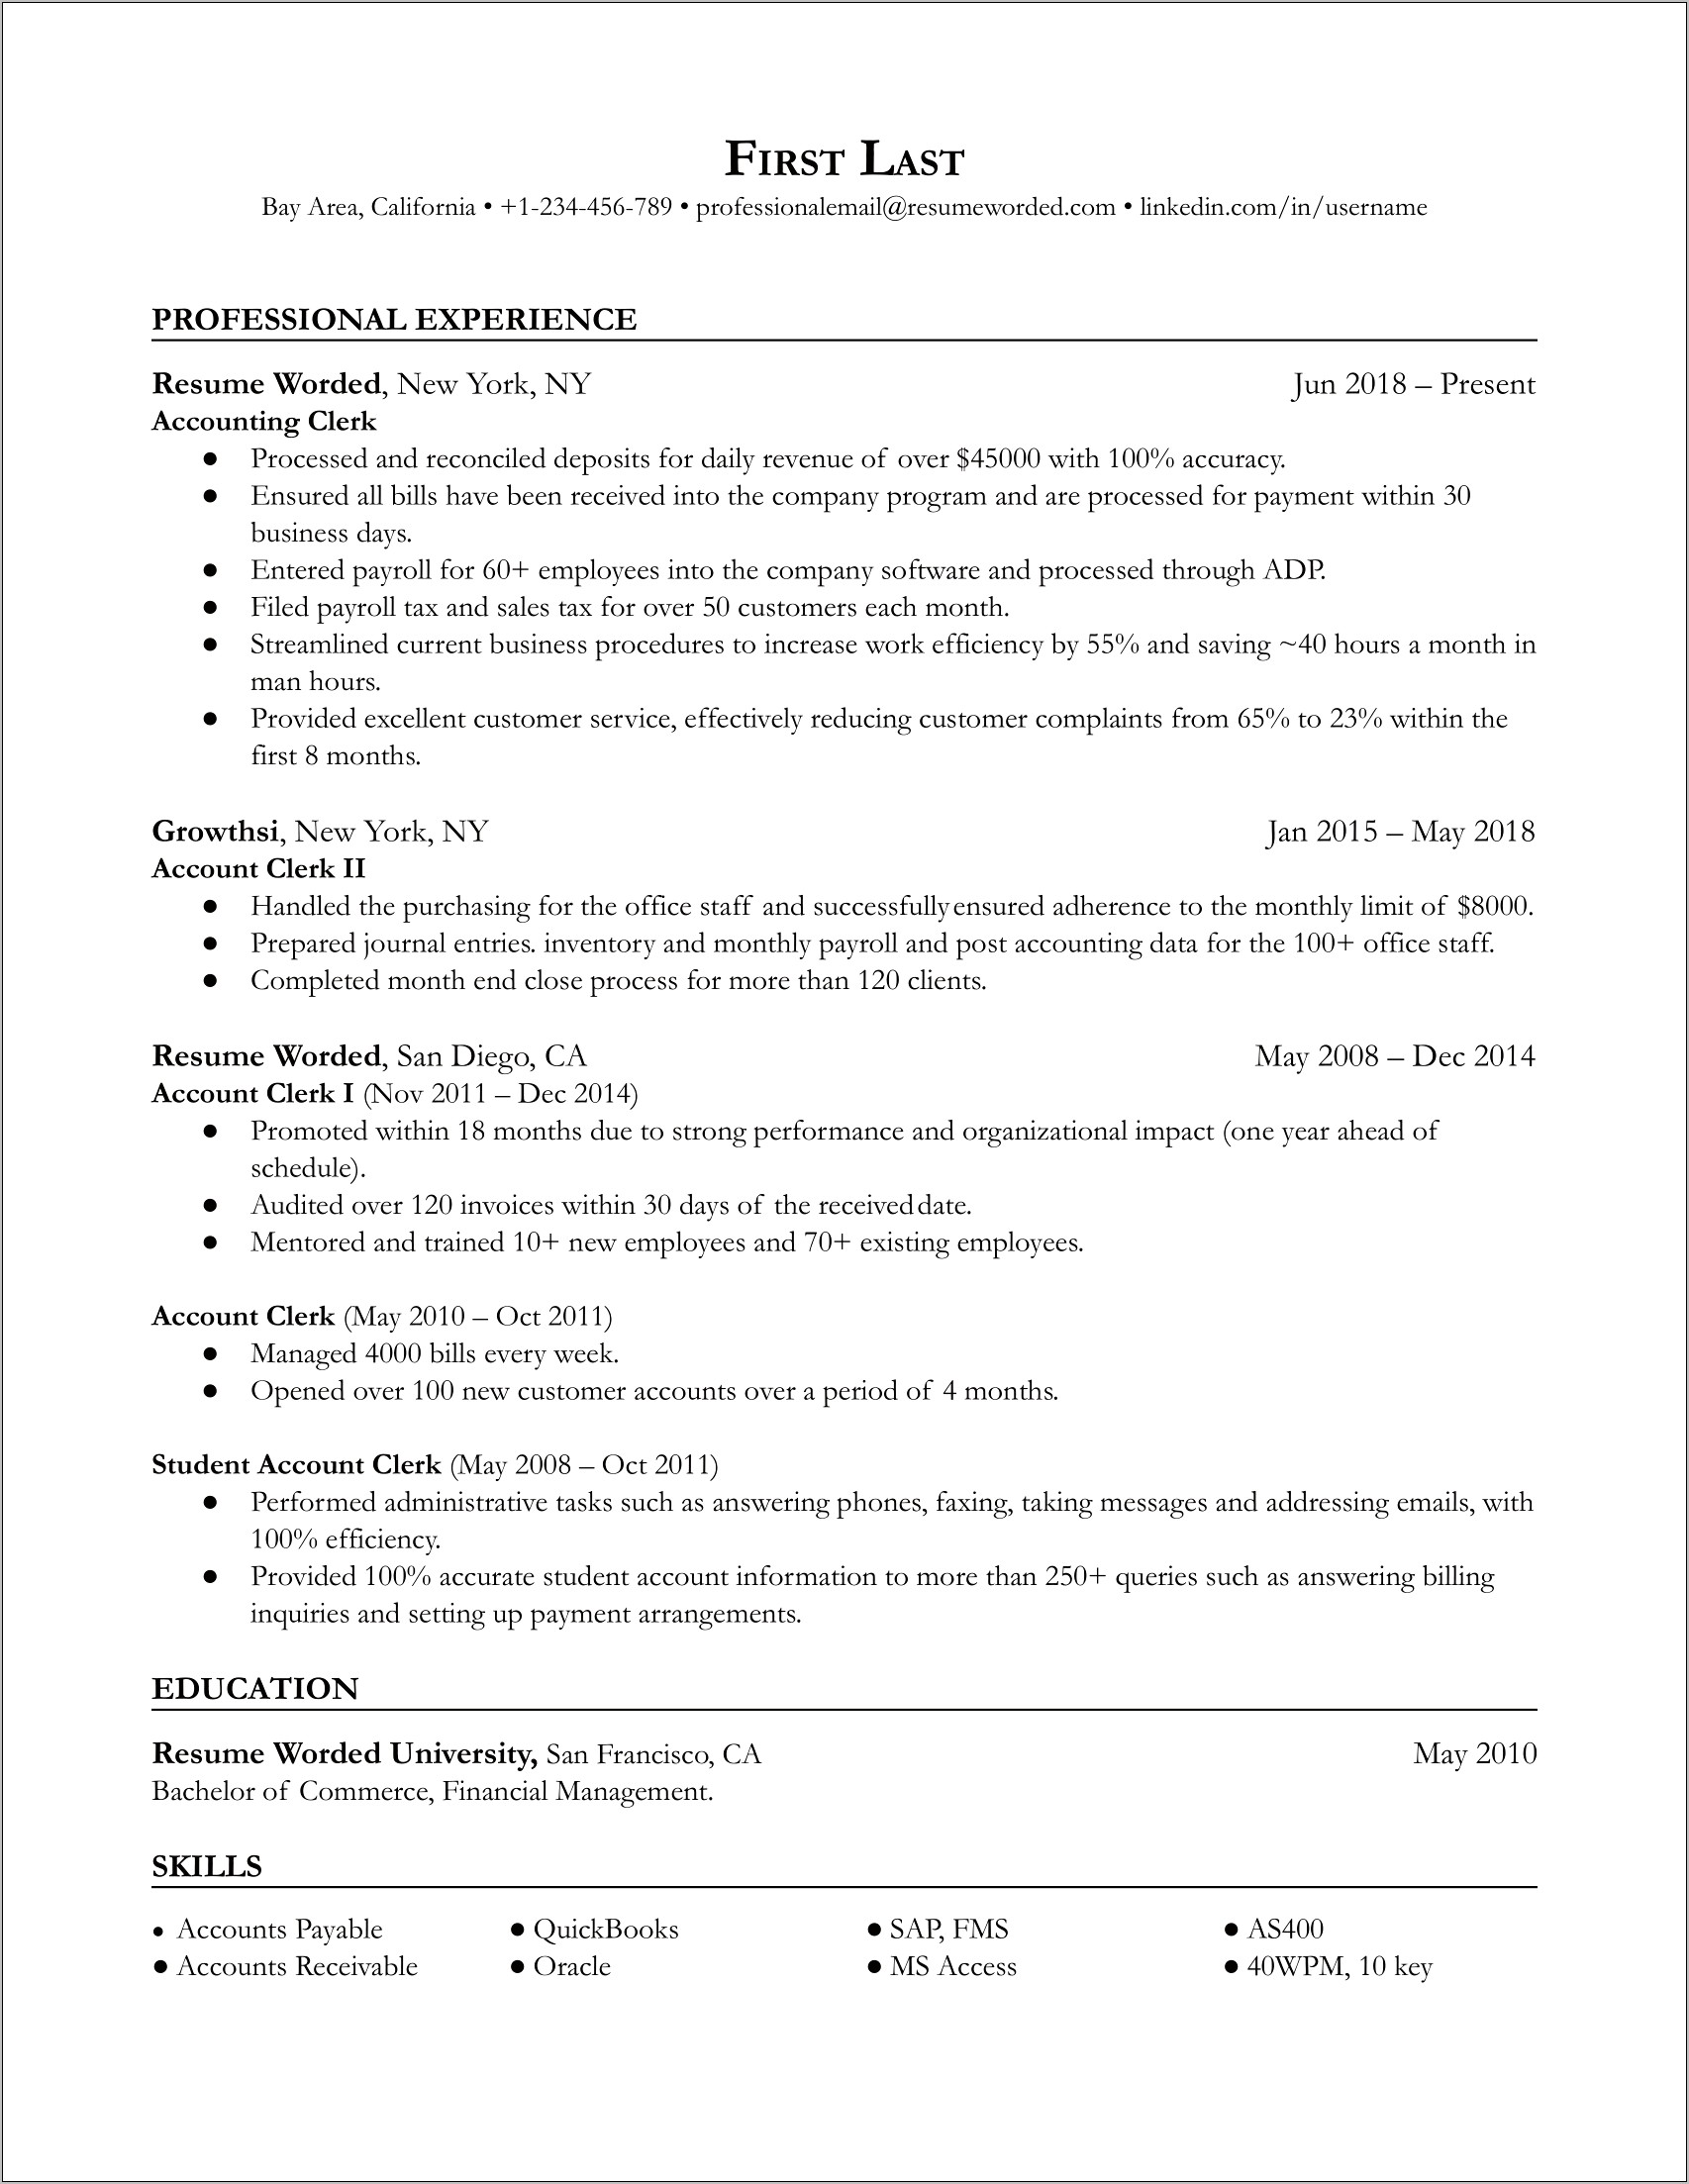 Resume Objective For General Ledger Accountant